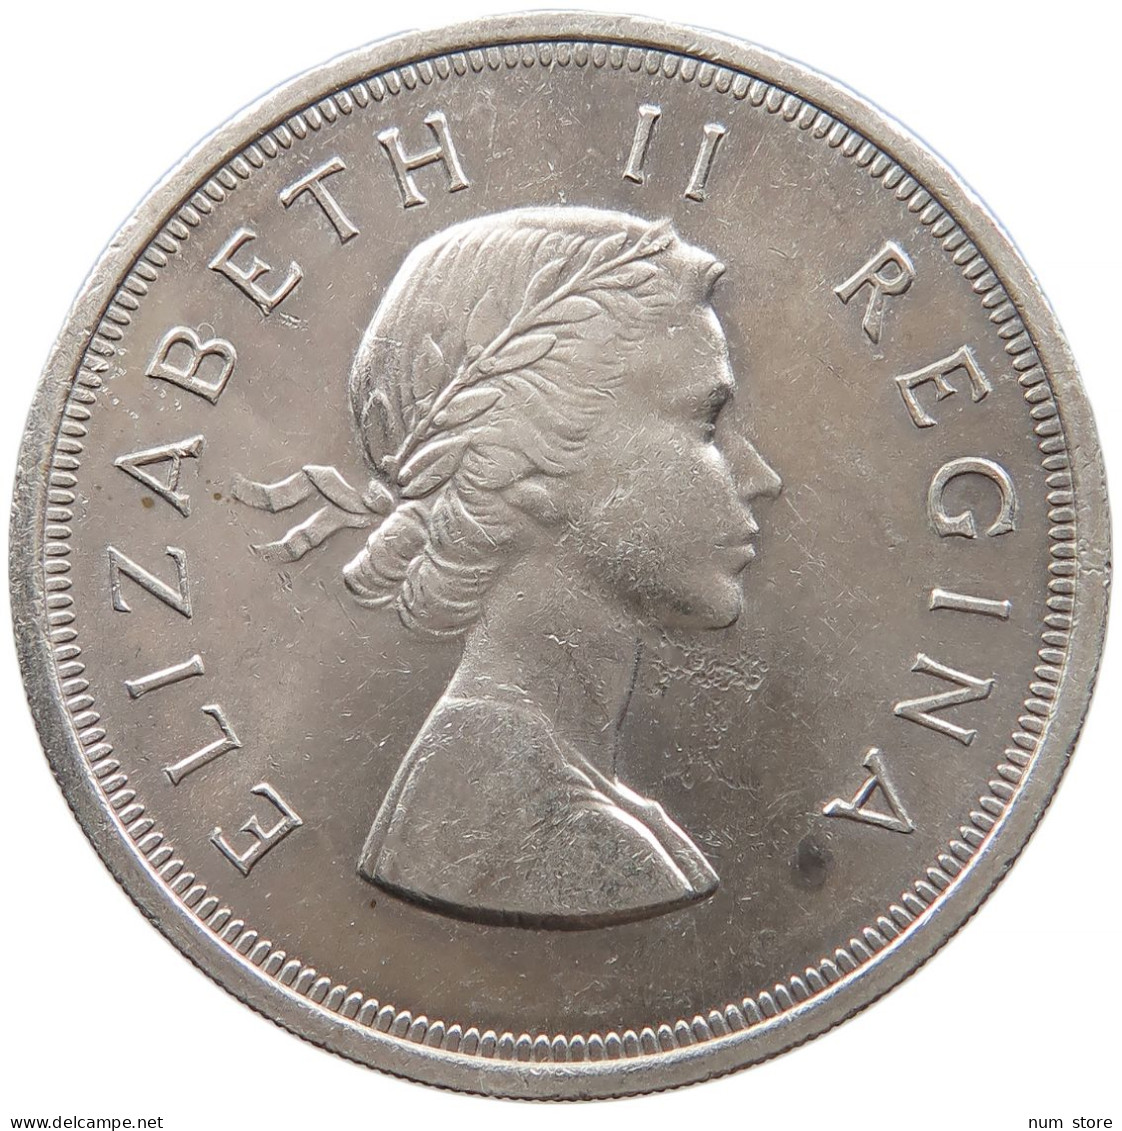 SOUTH AFRICA 5 SHILLINGS 1958 Elizabeth II. (1952-2022) #t025 0091 - South Africa